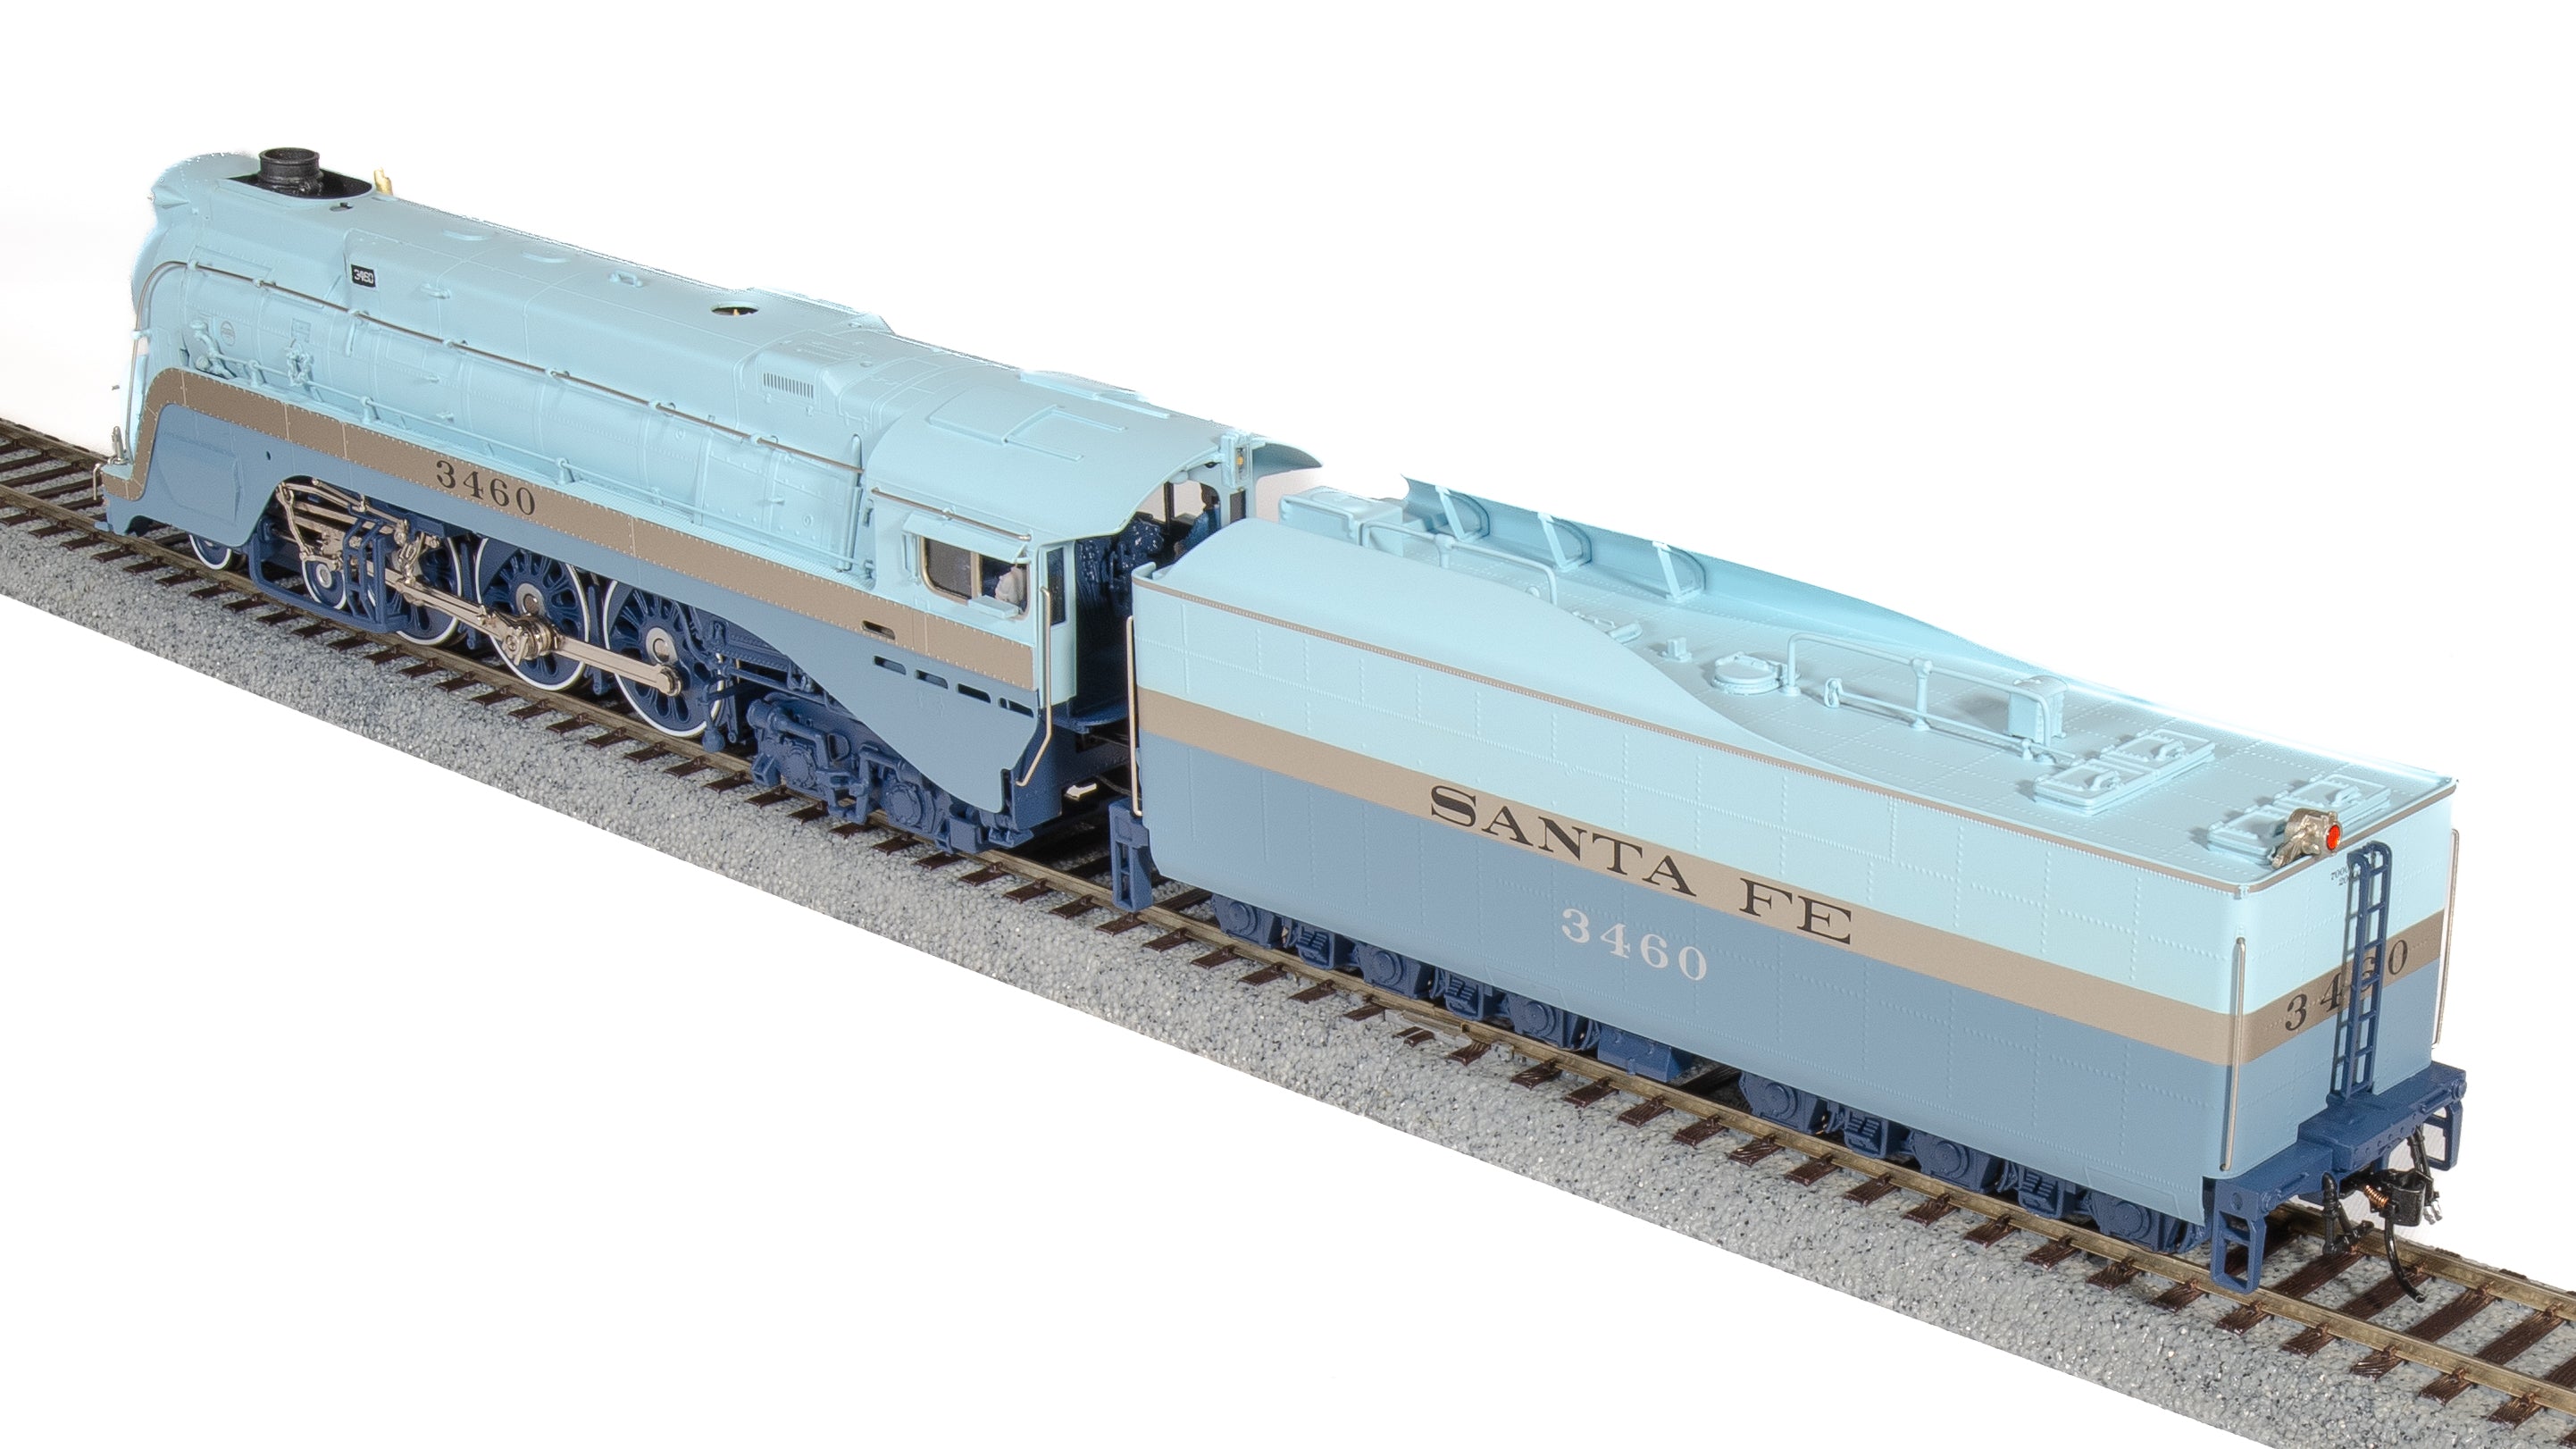 7350 ATSF Blue Goose, #3460, As-Delivered w/ 3460 on side of tender, Paragon4 Sound/DC/DCC, Smoke, HO Default Title